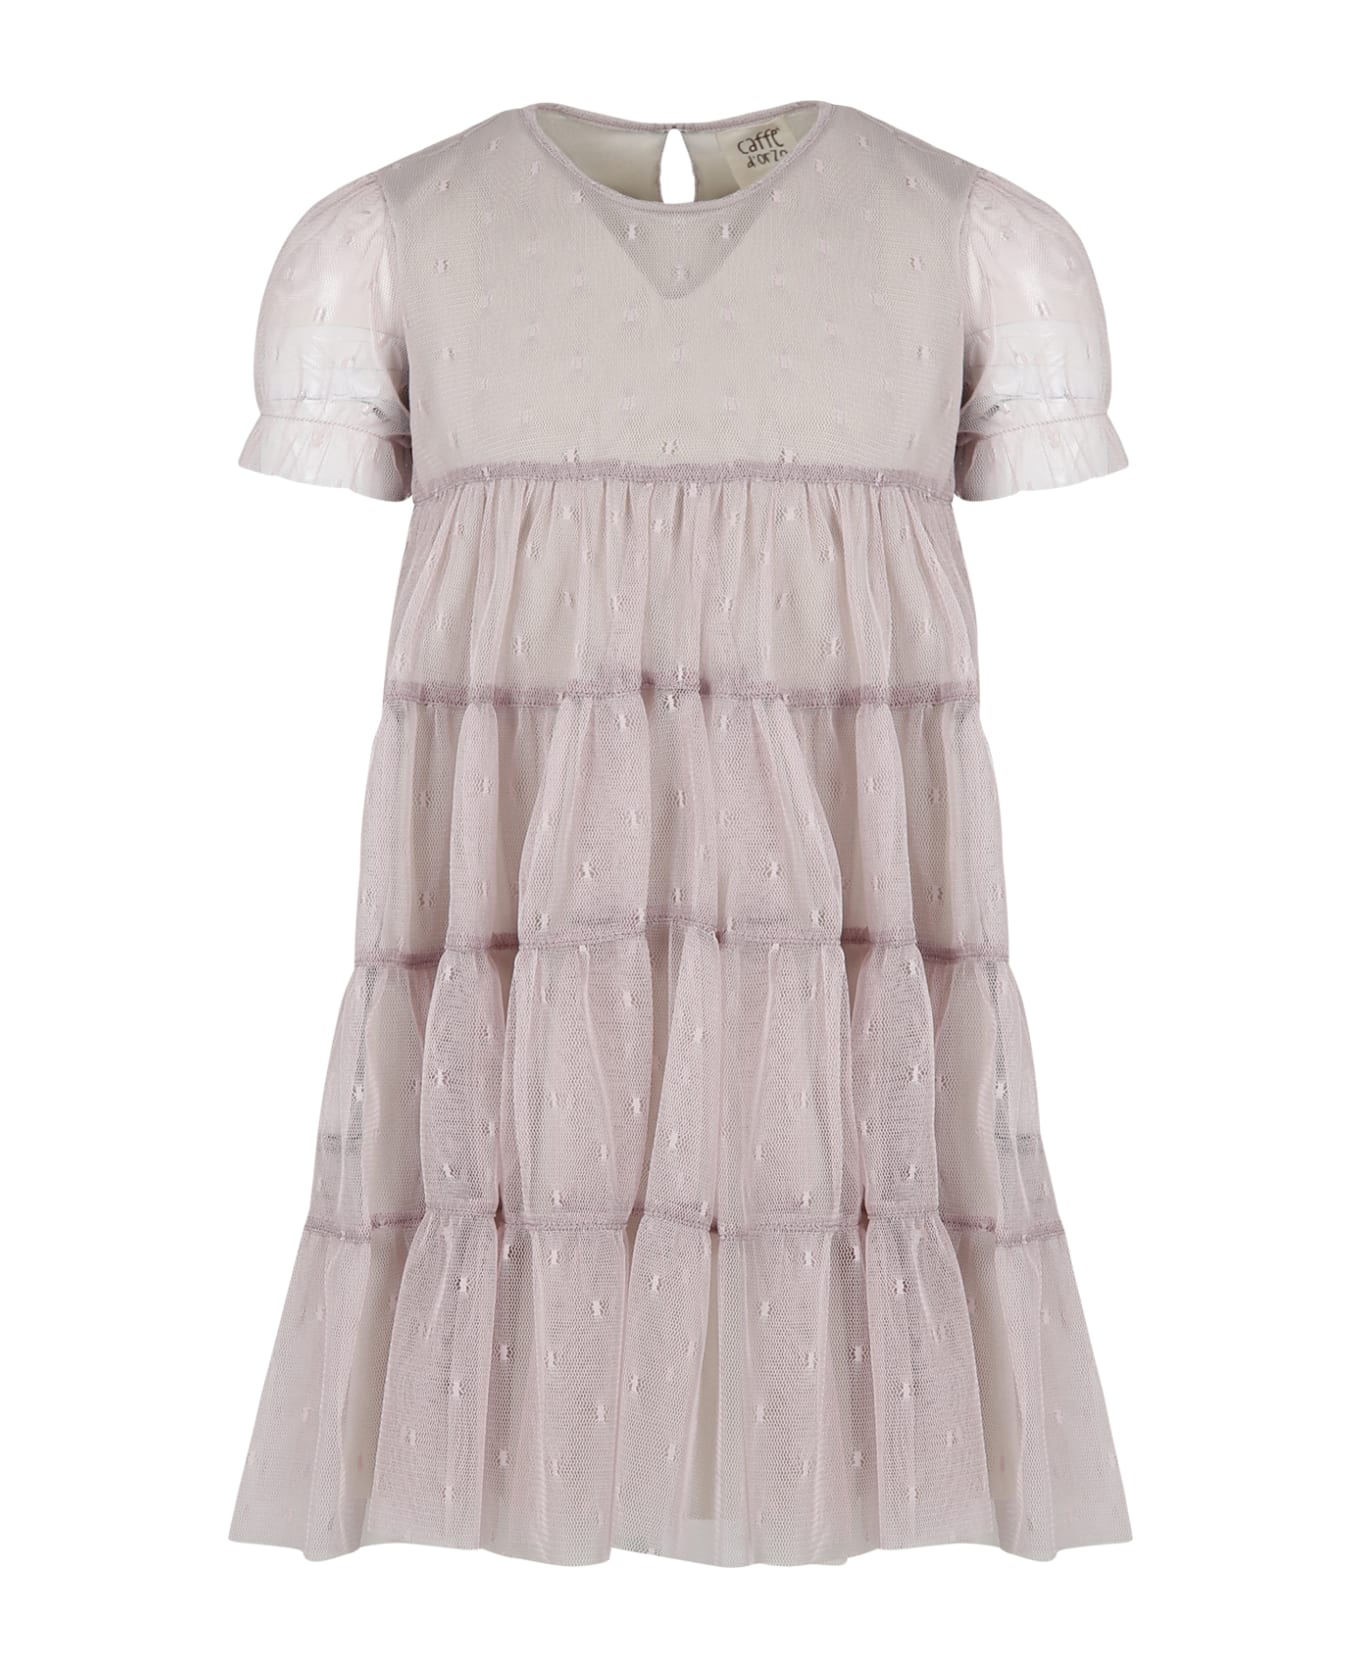 Caffe' d'Orzo Pink Dress For Girl With Embroidery - Pink ワンピース＆ドレス